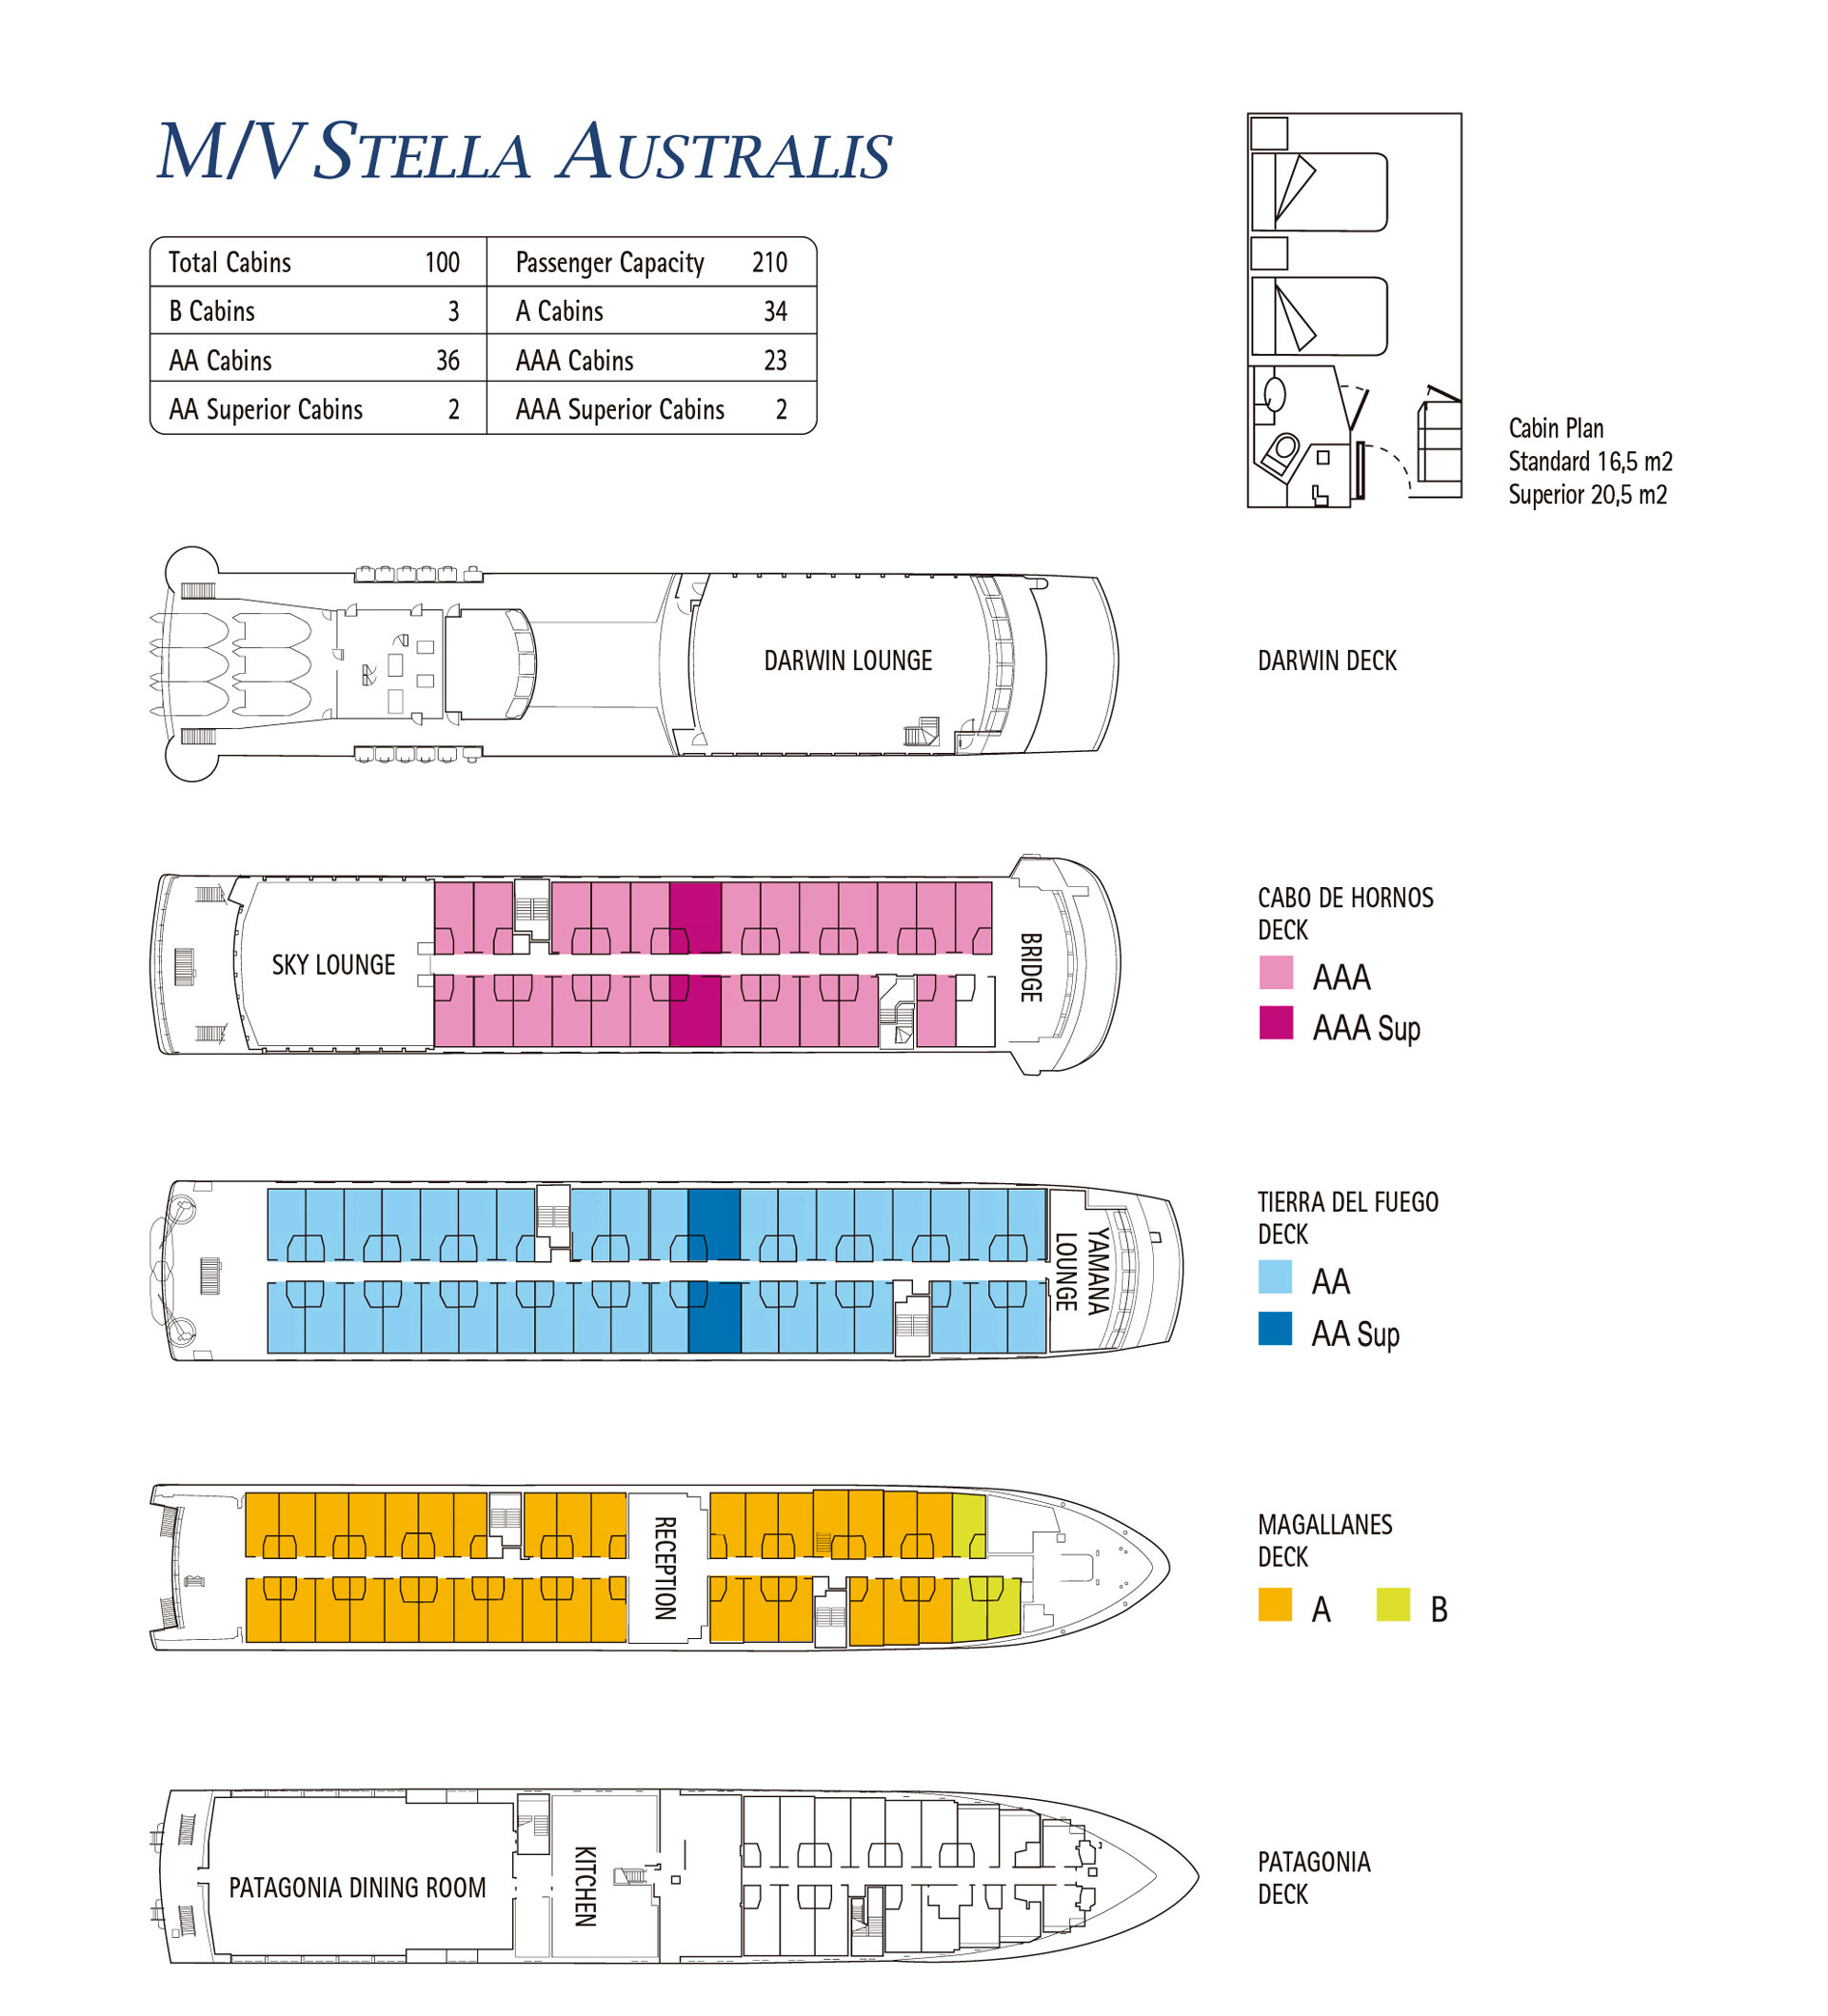 Deck plan of Stella Australis showing its 5 decks, 100 cabins, color-coded 6 cabin categories & bird's eye view of cabin layout.